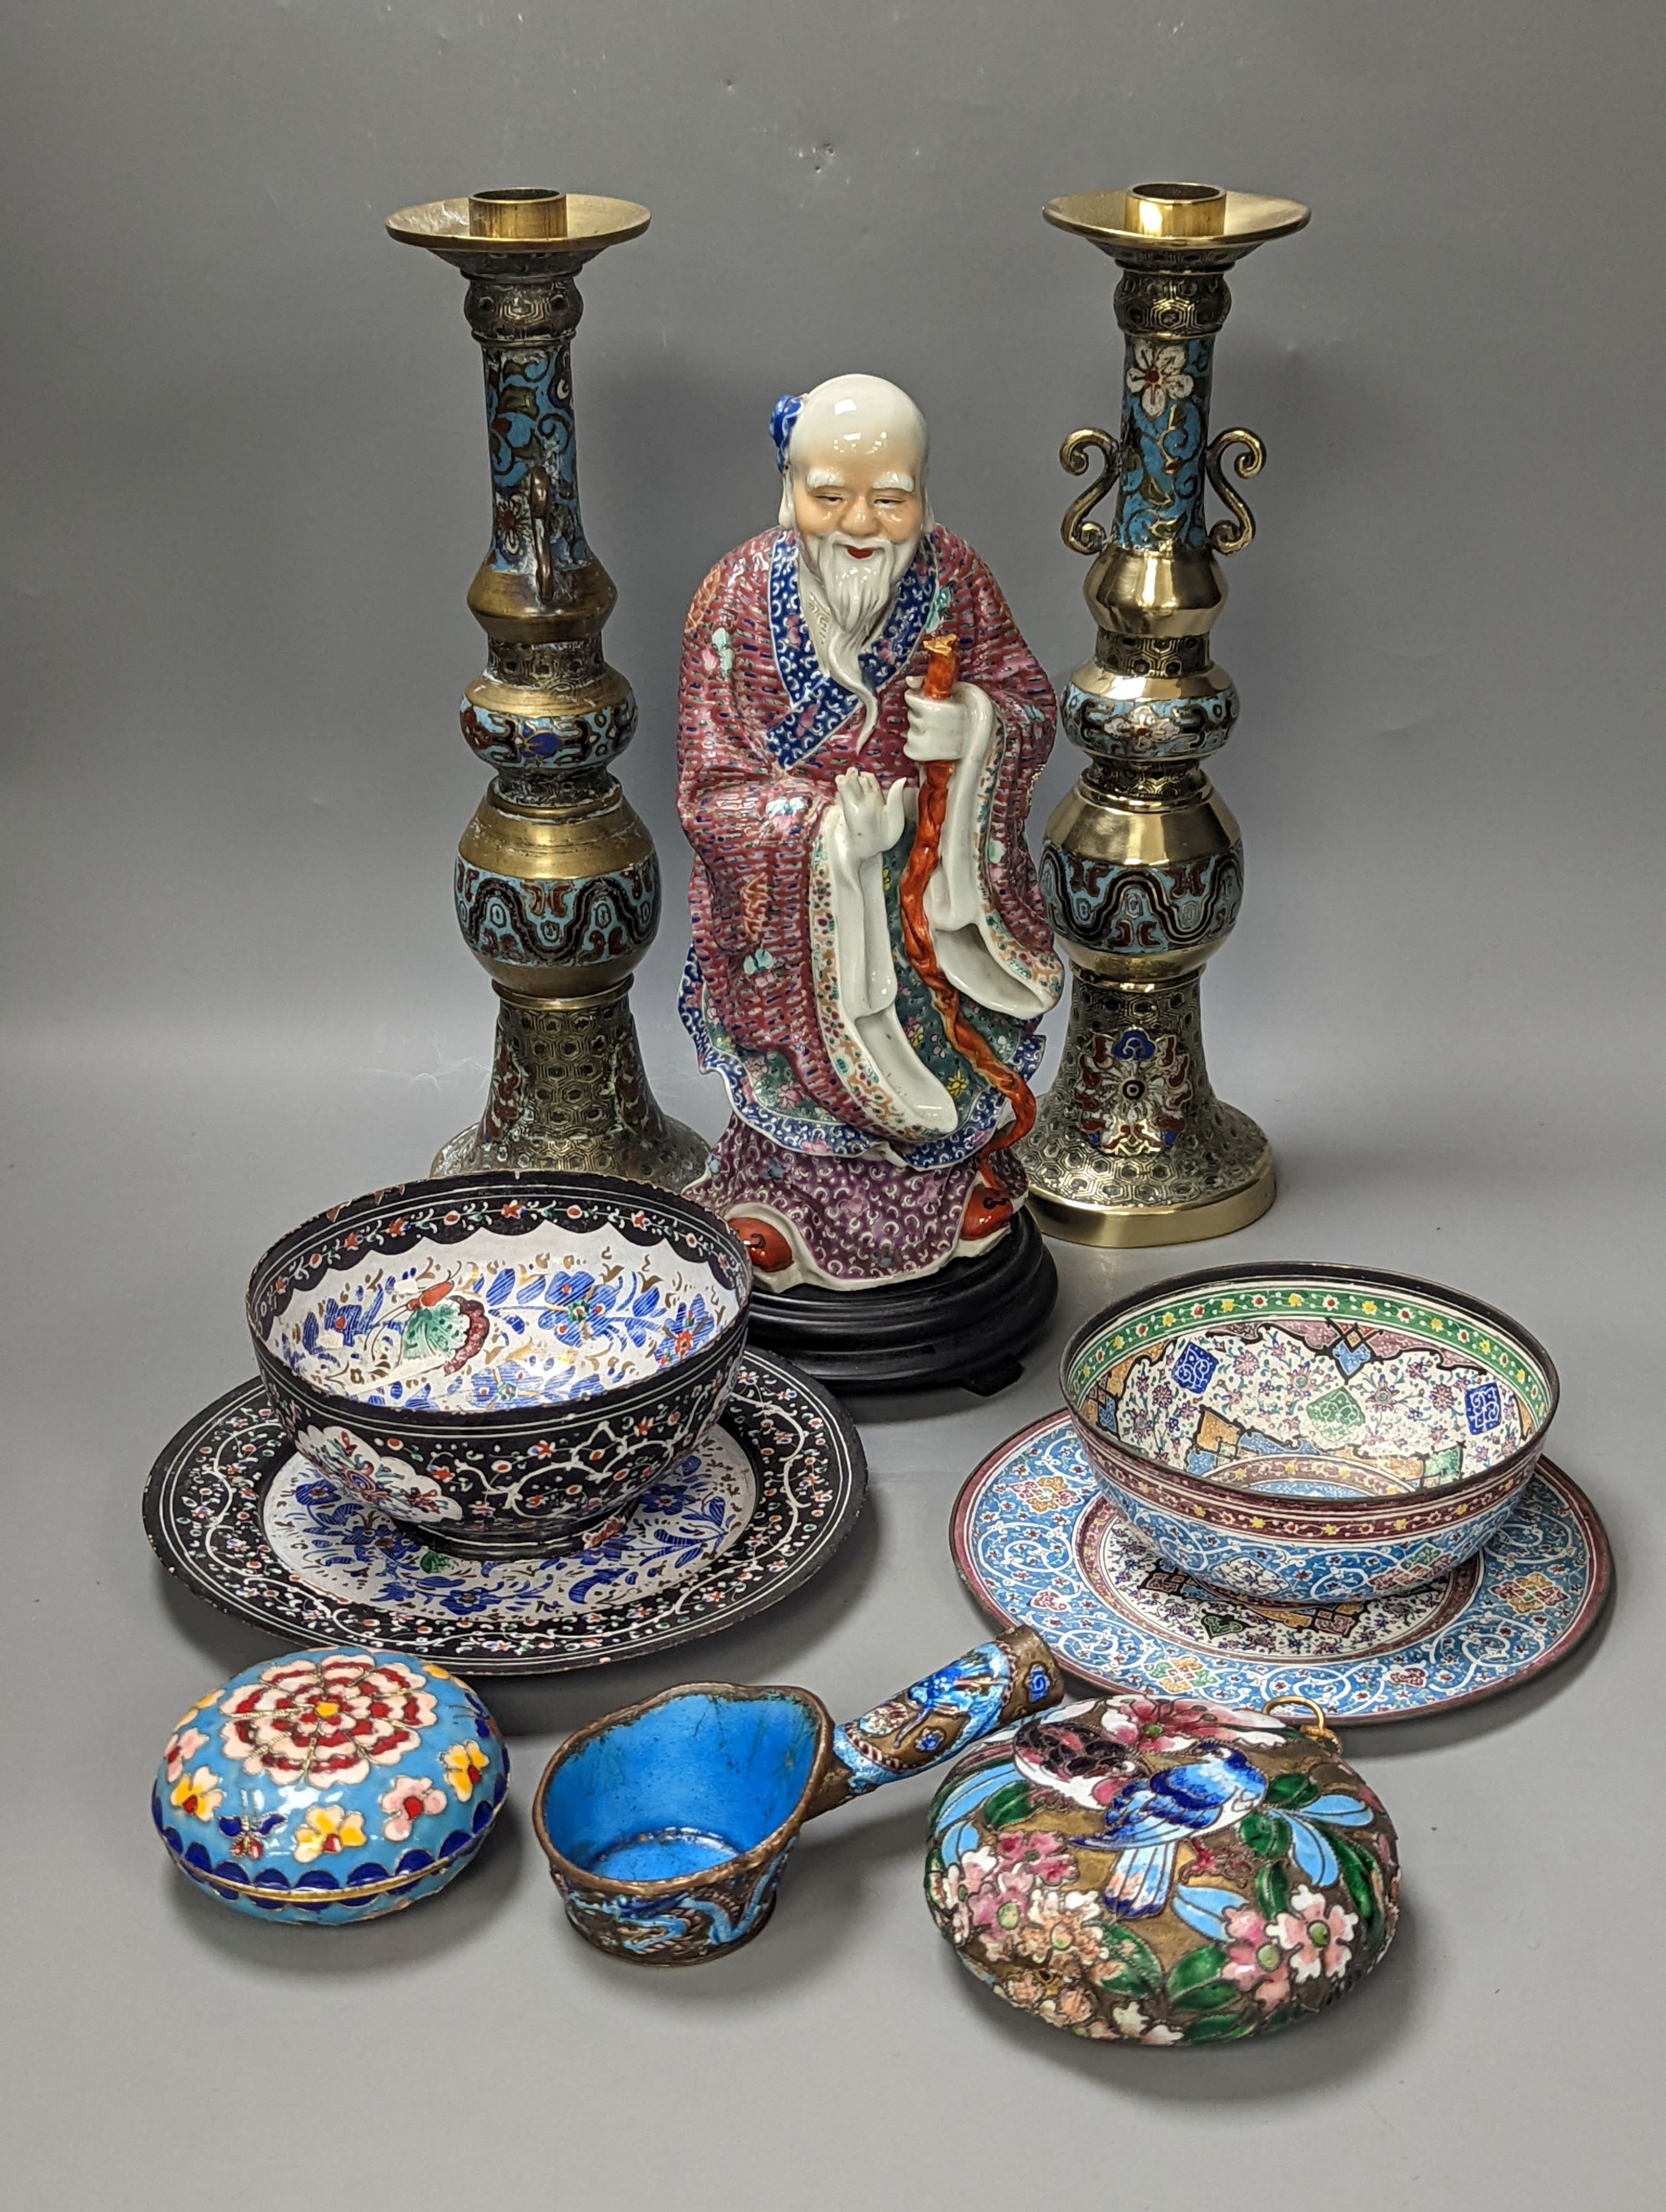 A Chinese porcelain figure of Shao Lao, a pair of Japanese bronze and champleve enamel candlesticks, Persian enamel wares etc